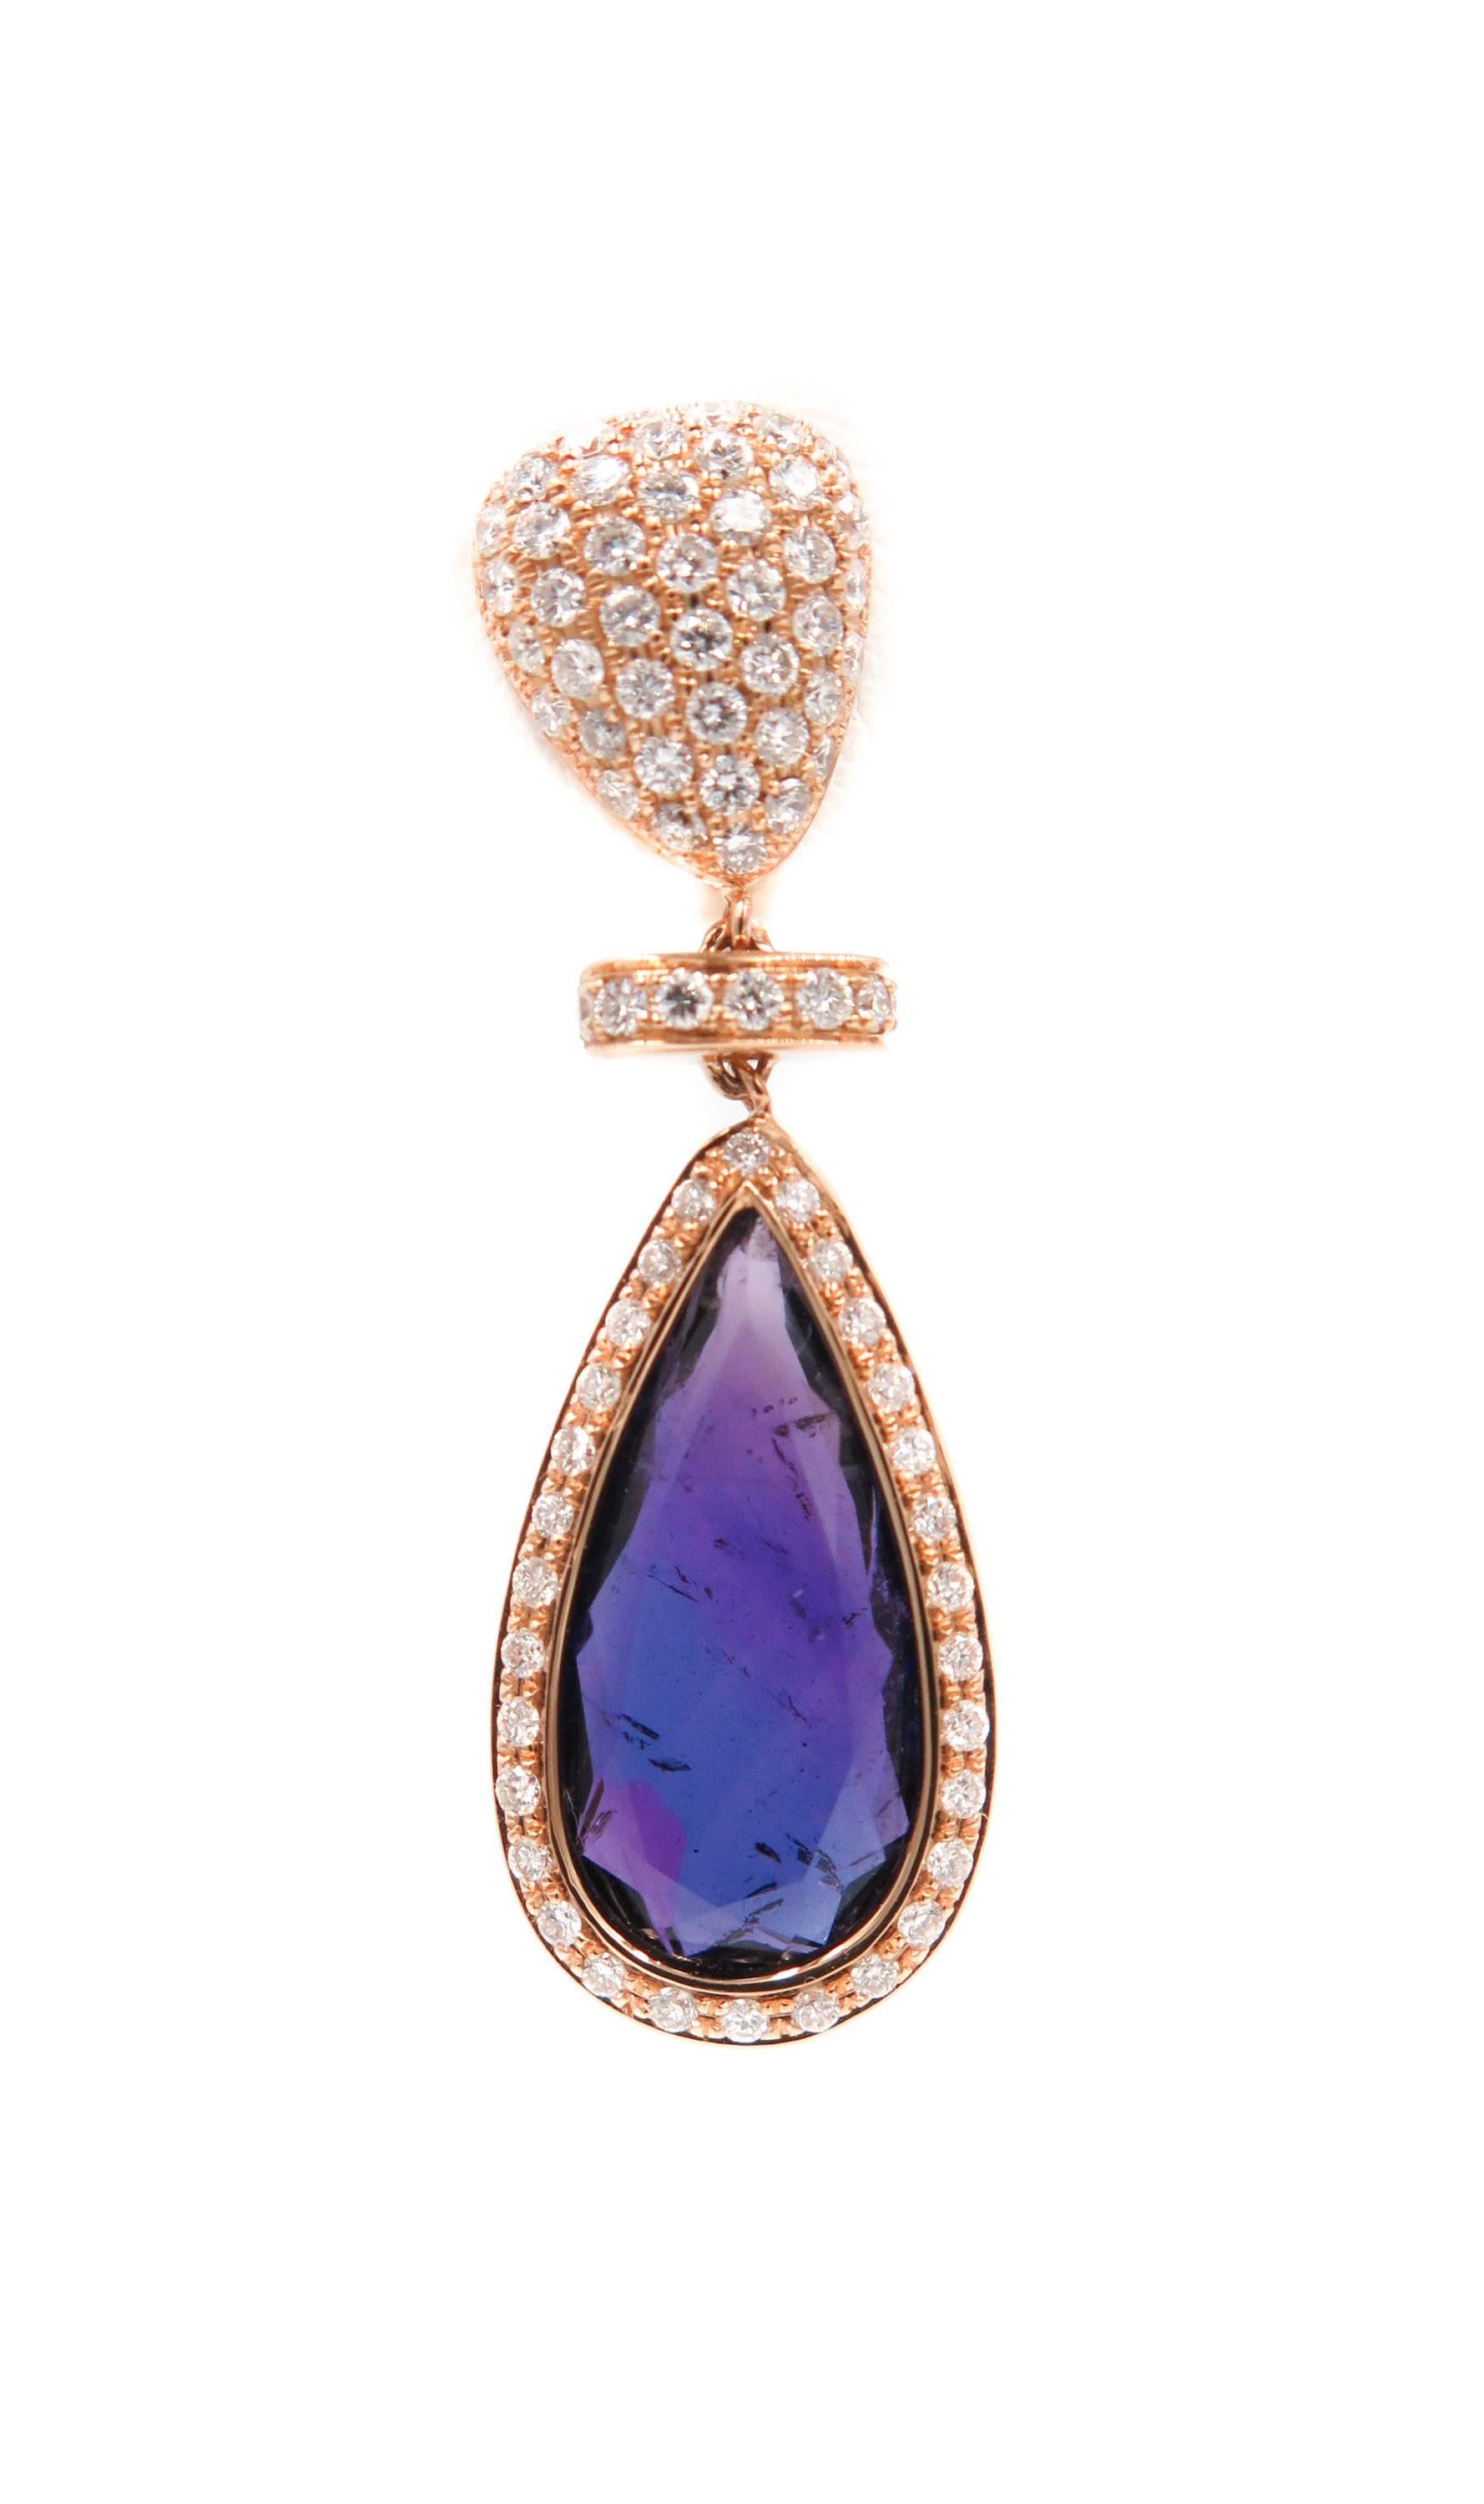 The color purple has been associated with Royalty and Monseo brings a new design in this contemporary pair of earrings respecting history and tradition with an exclusive production of unique pieces.
Handcrafted in 19K rose gold and pave set white